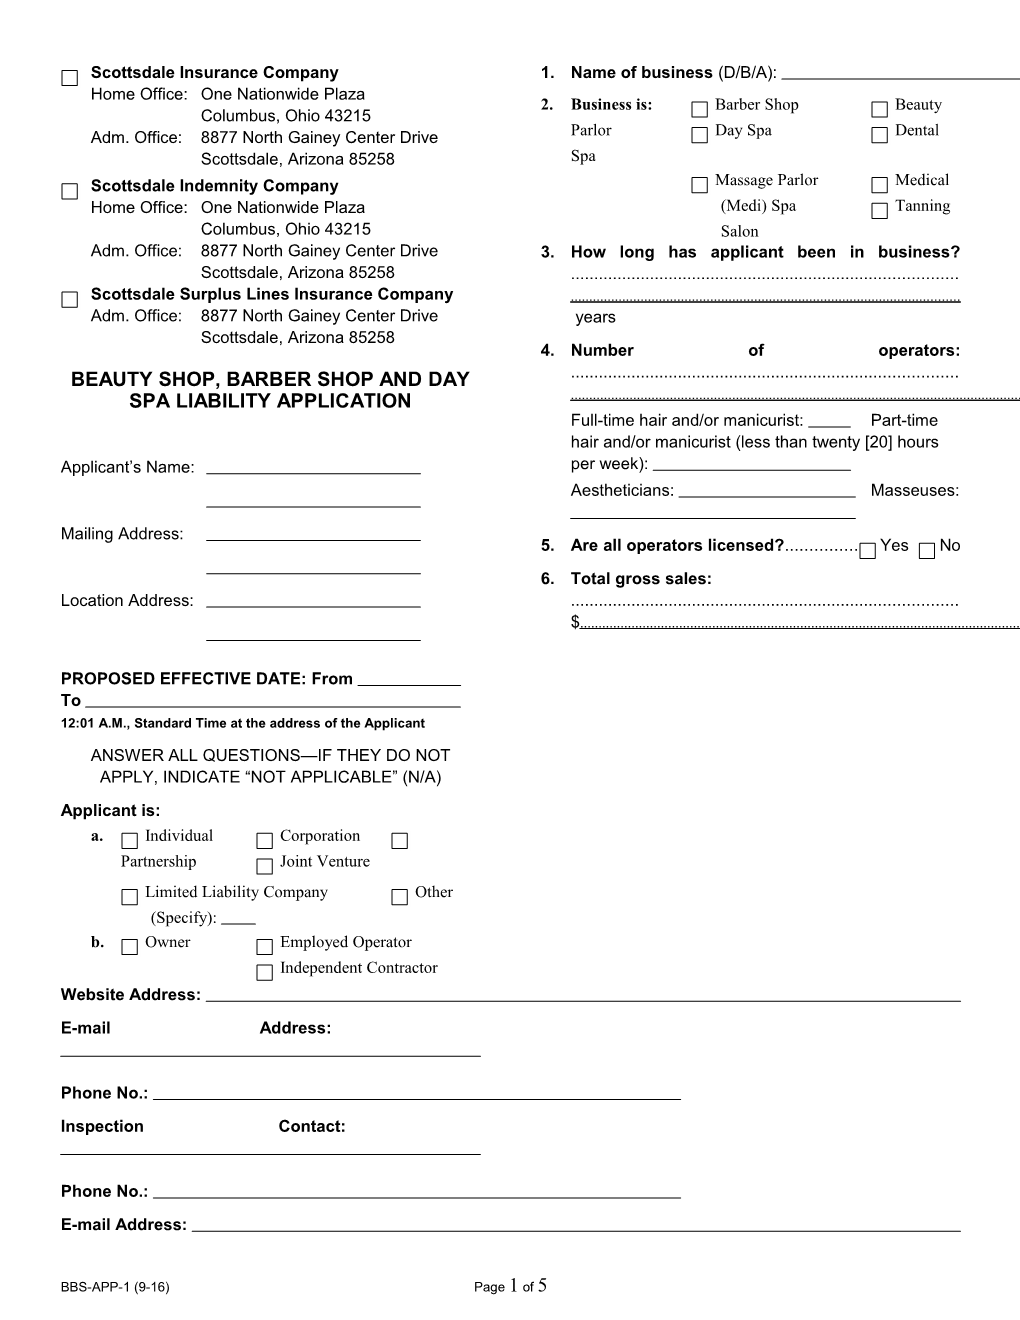 Beauty Shop, Barber Shop and Day Spa Liability Application